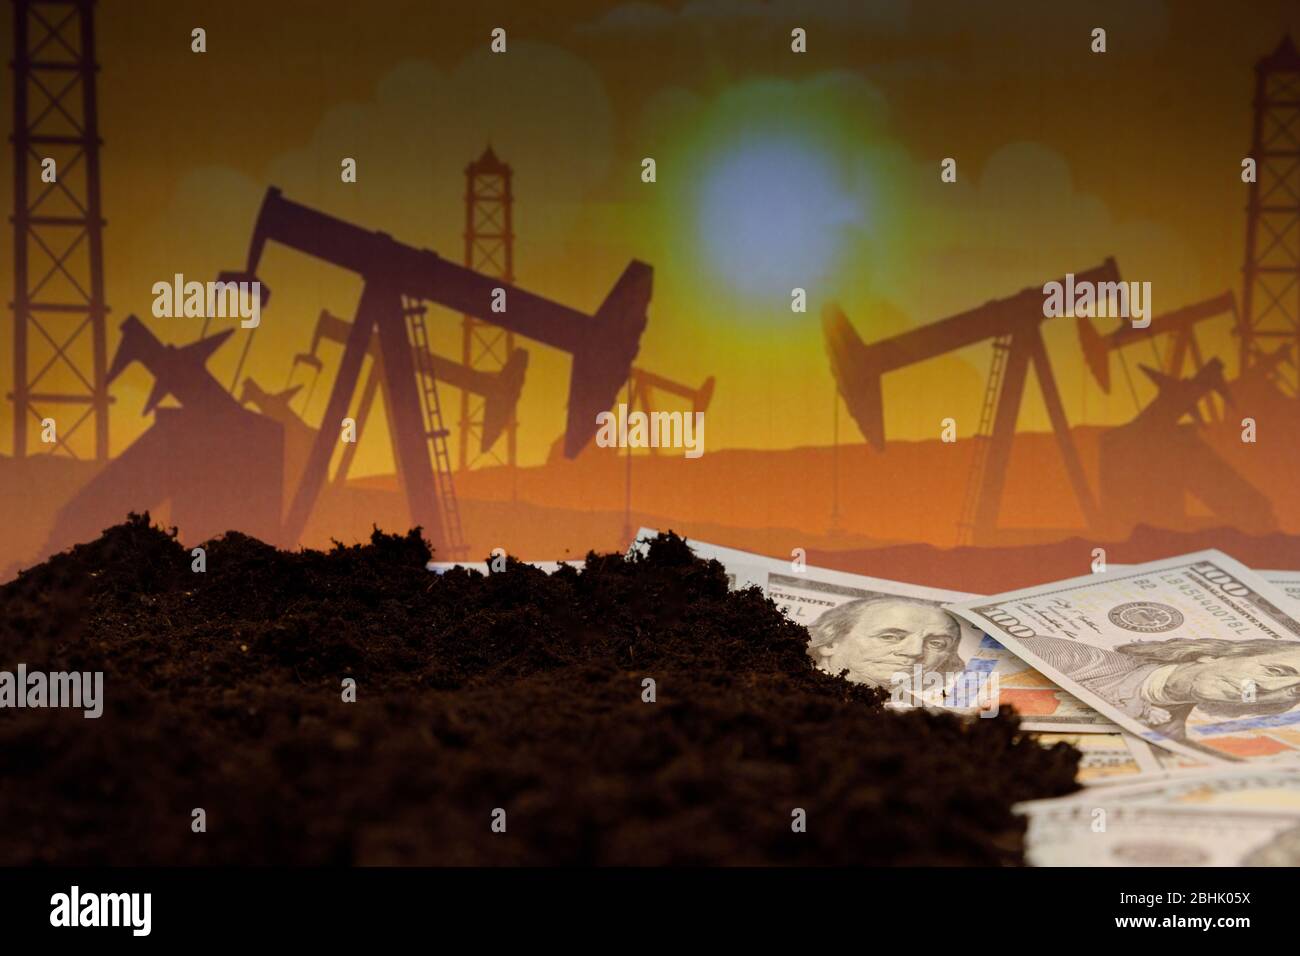 Oil industry crisis concept. Drop in crude oil prices. Hundreds of dollar bills under dirt. Stock Photo